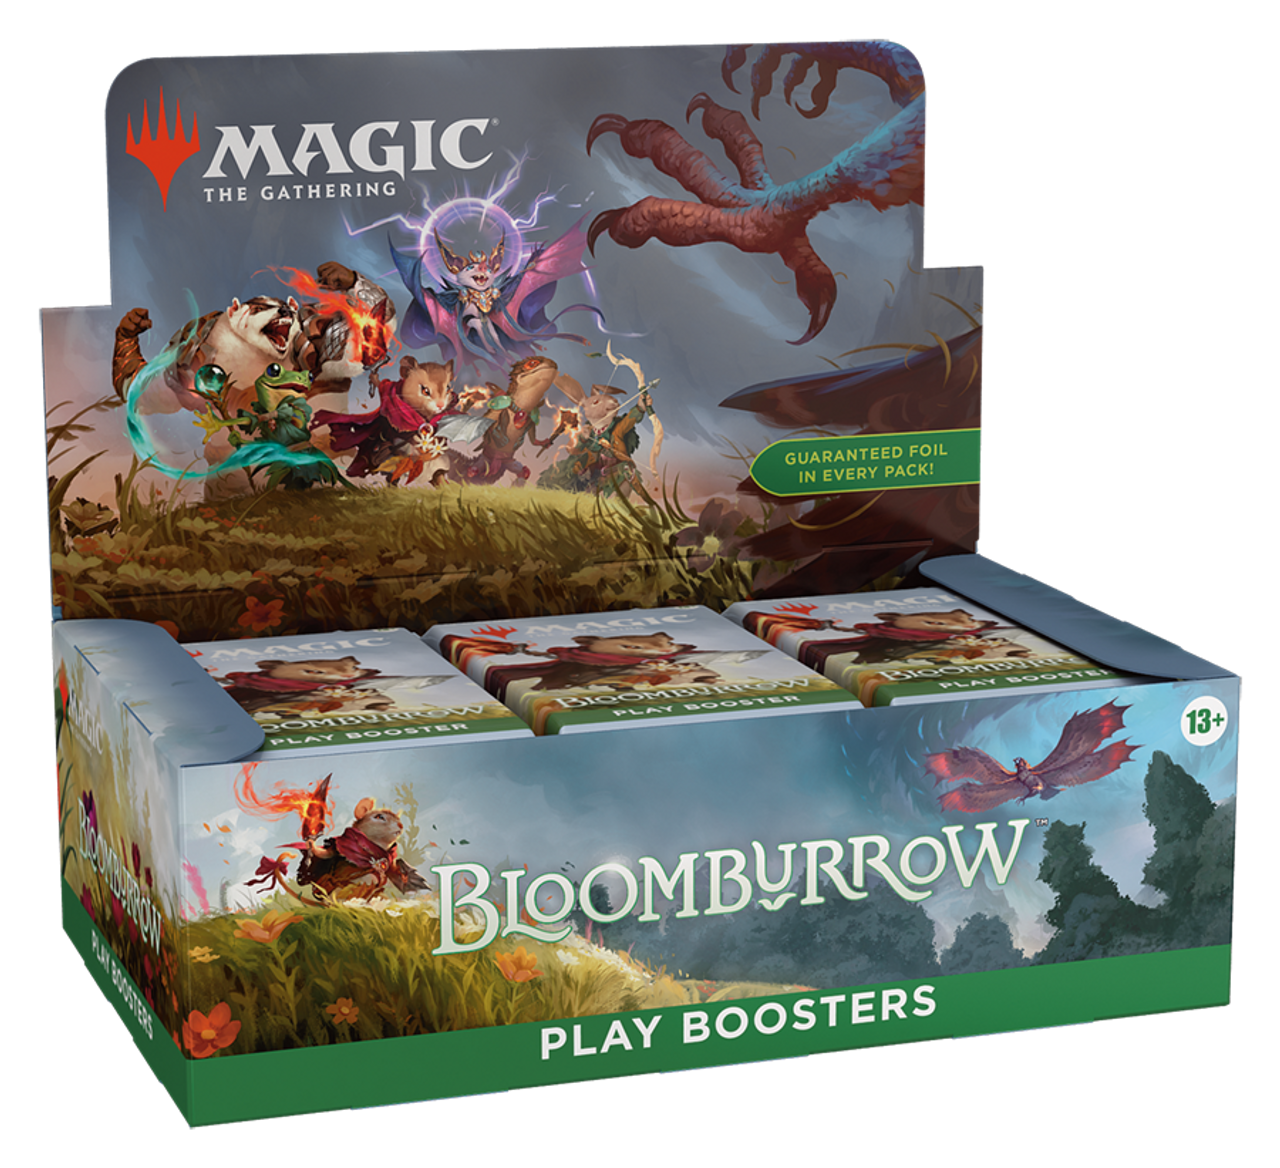 Magic: The Gathering Bloomburrow Play Booster Box